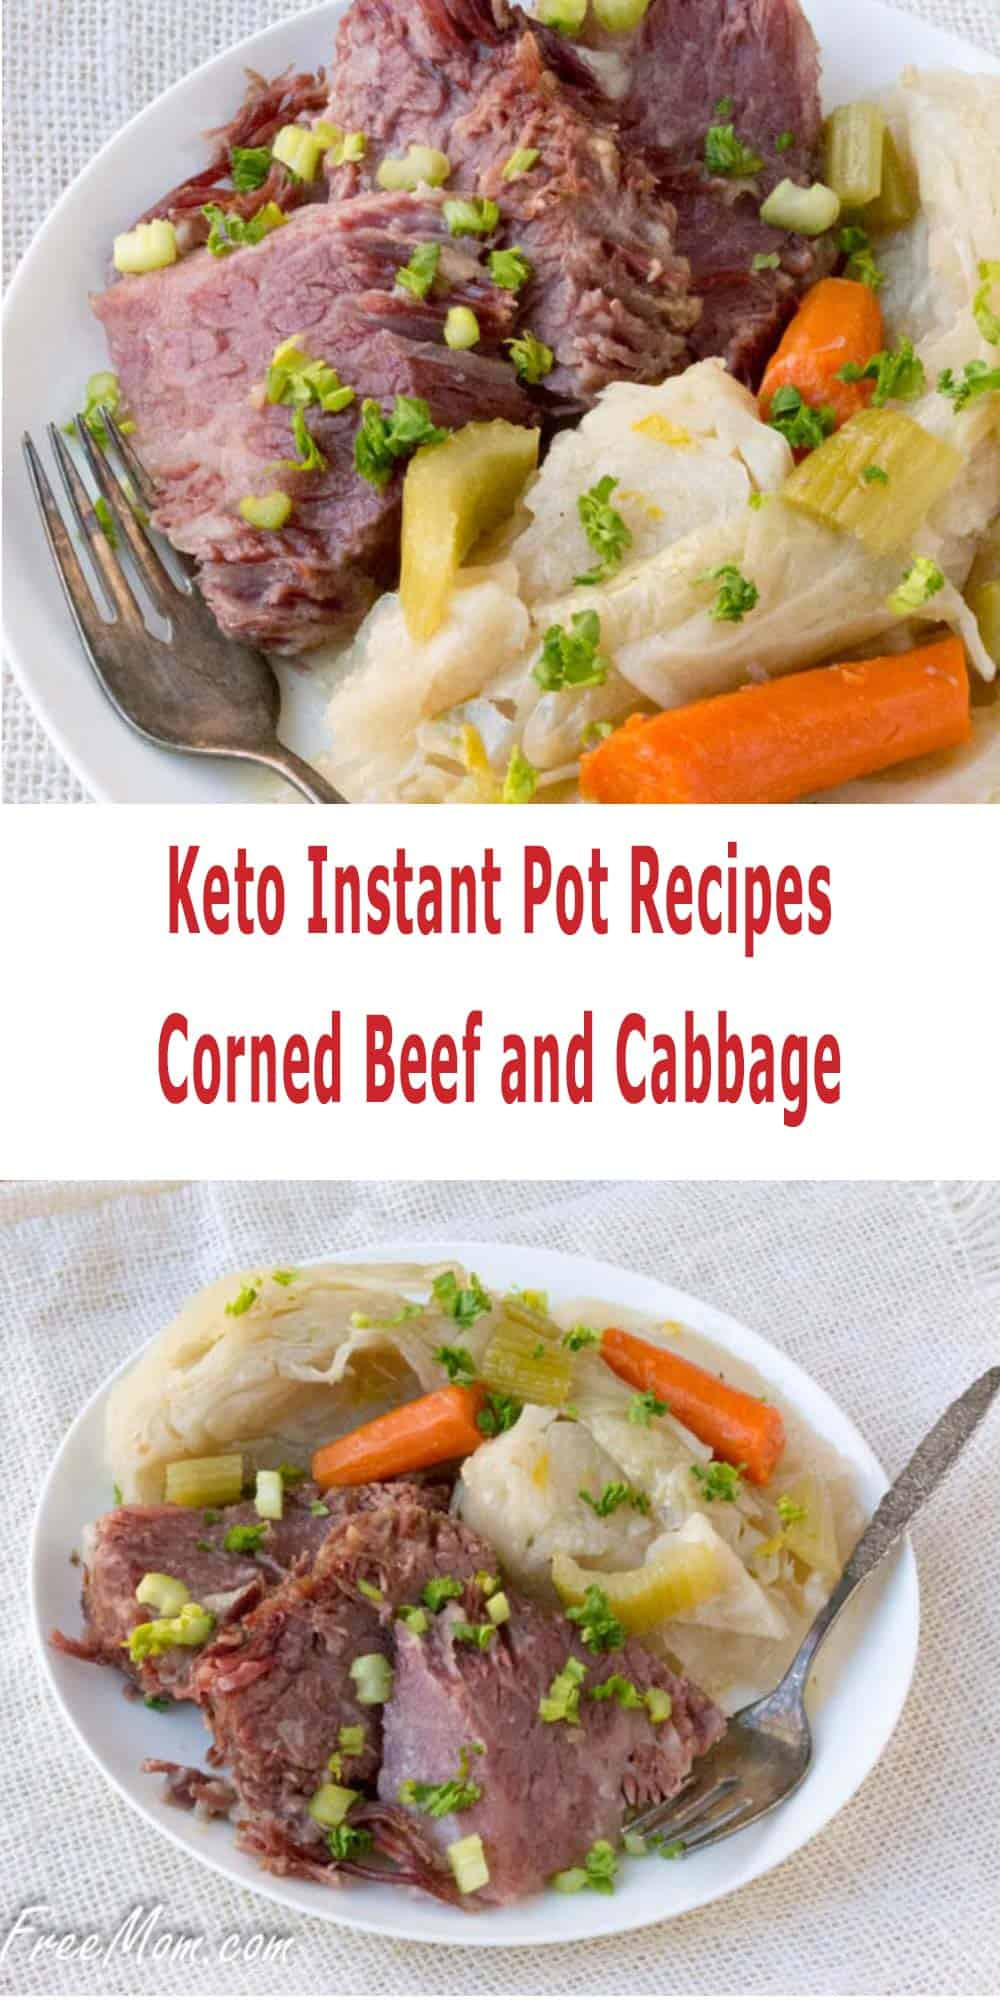 Instant Pot Corned Beef Keto
 keto instant pot beef recipes corned beef and cabbage